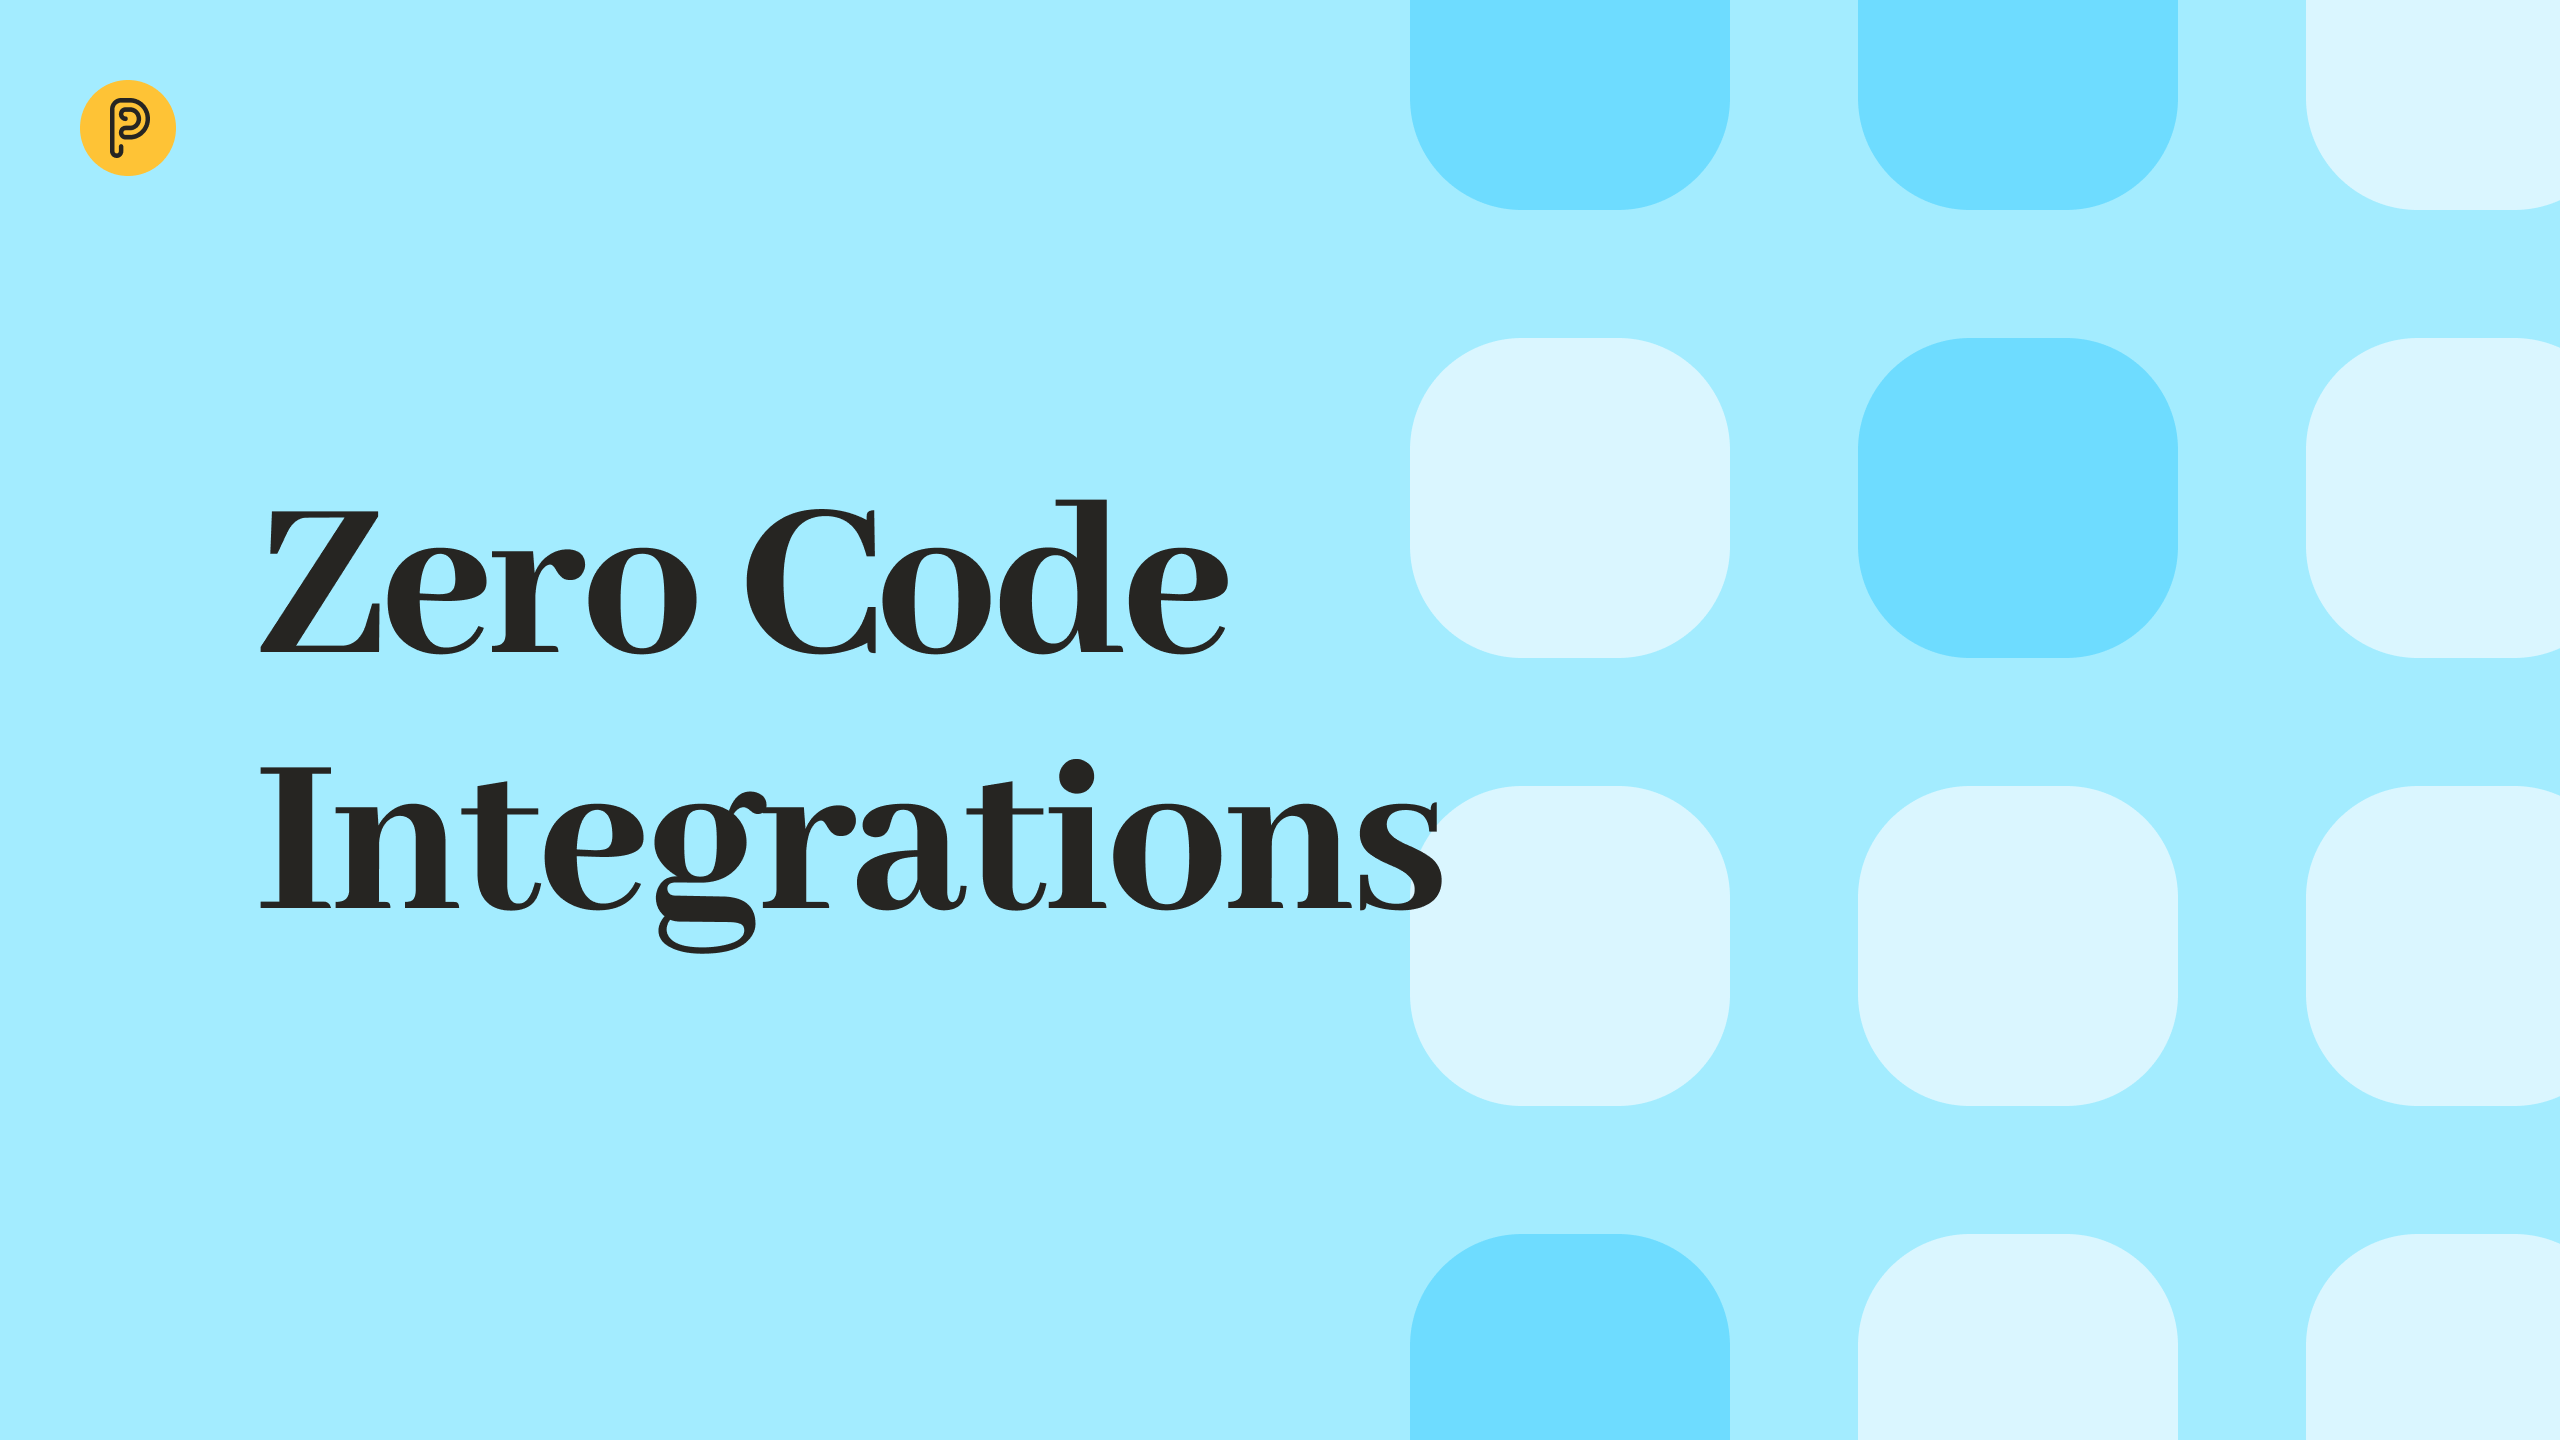 Automate Your Pneumatic Workflows with Zero Code Integrations